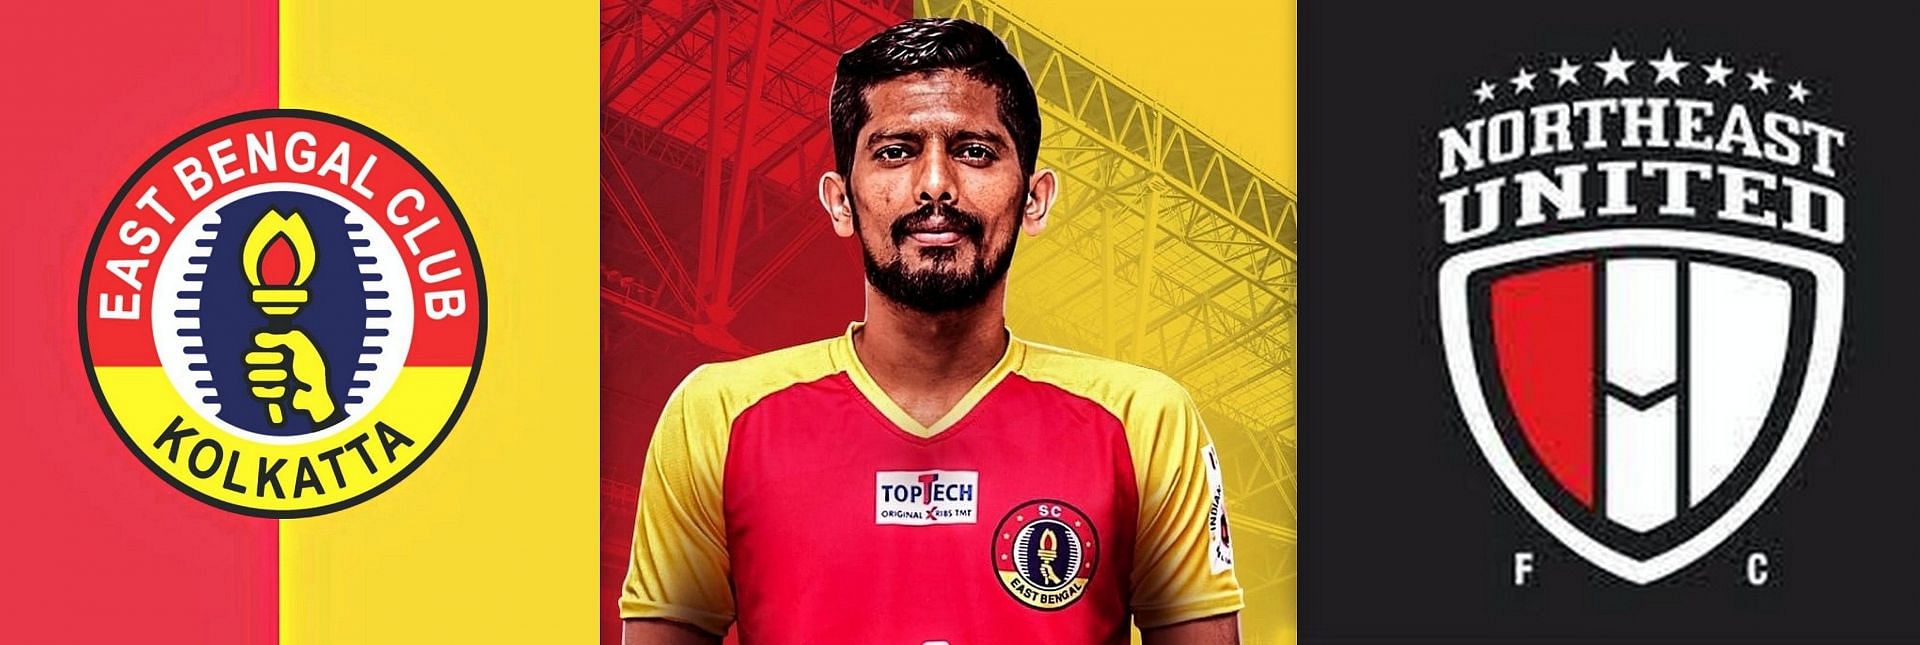 East Bengal or NorthEast United - which club will Raju Gaikwad join for the upcoming season?